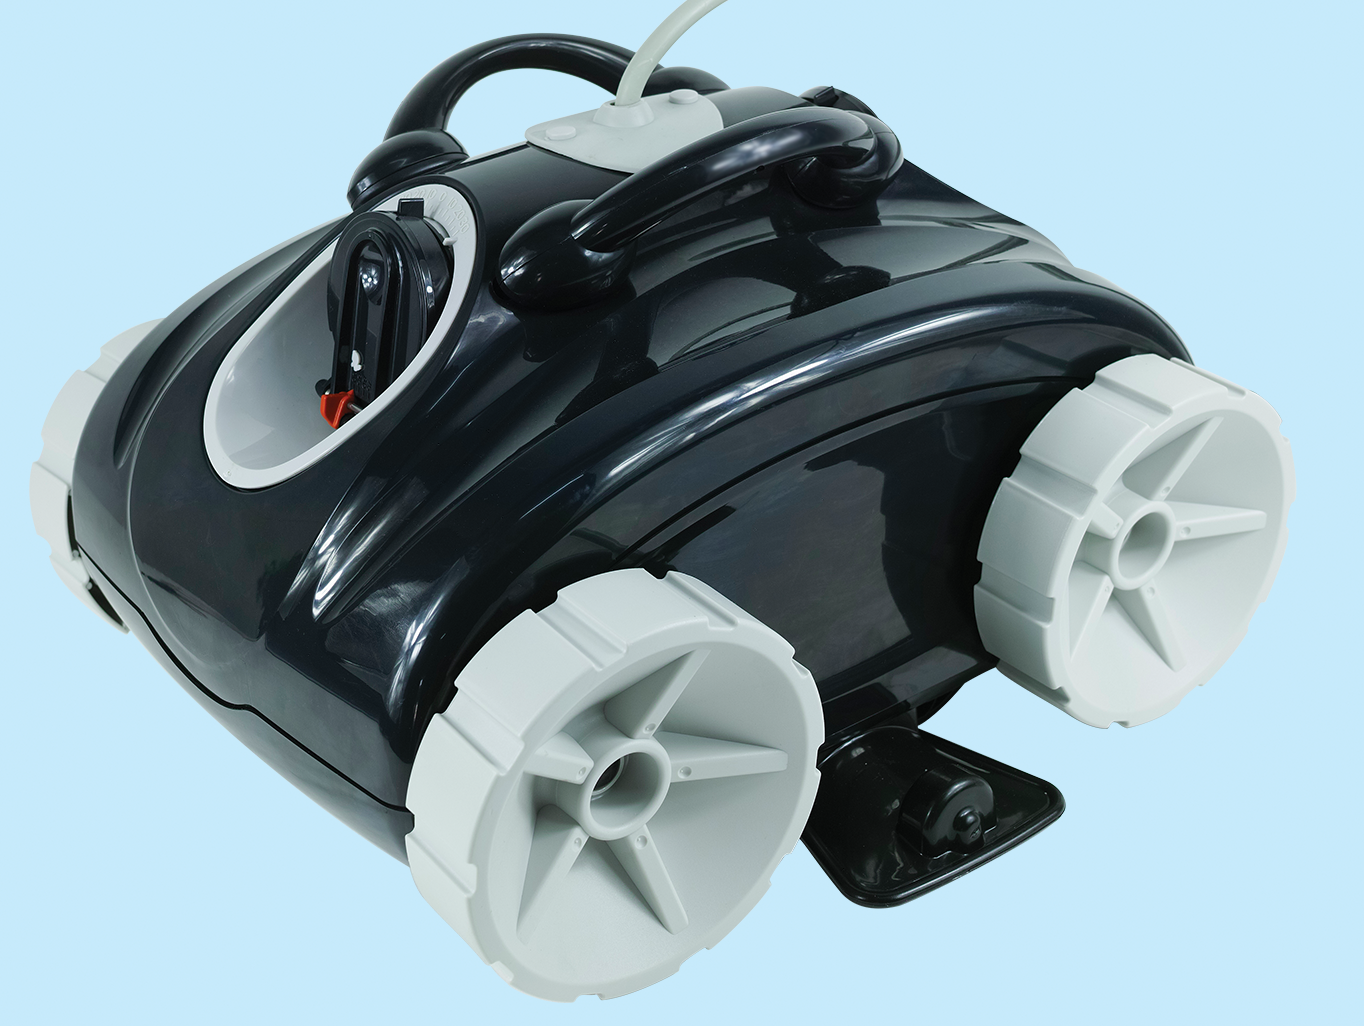 ROBOTIC VACUUMS — ABOVE-GROUND POOLS